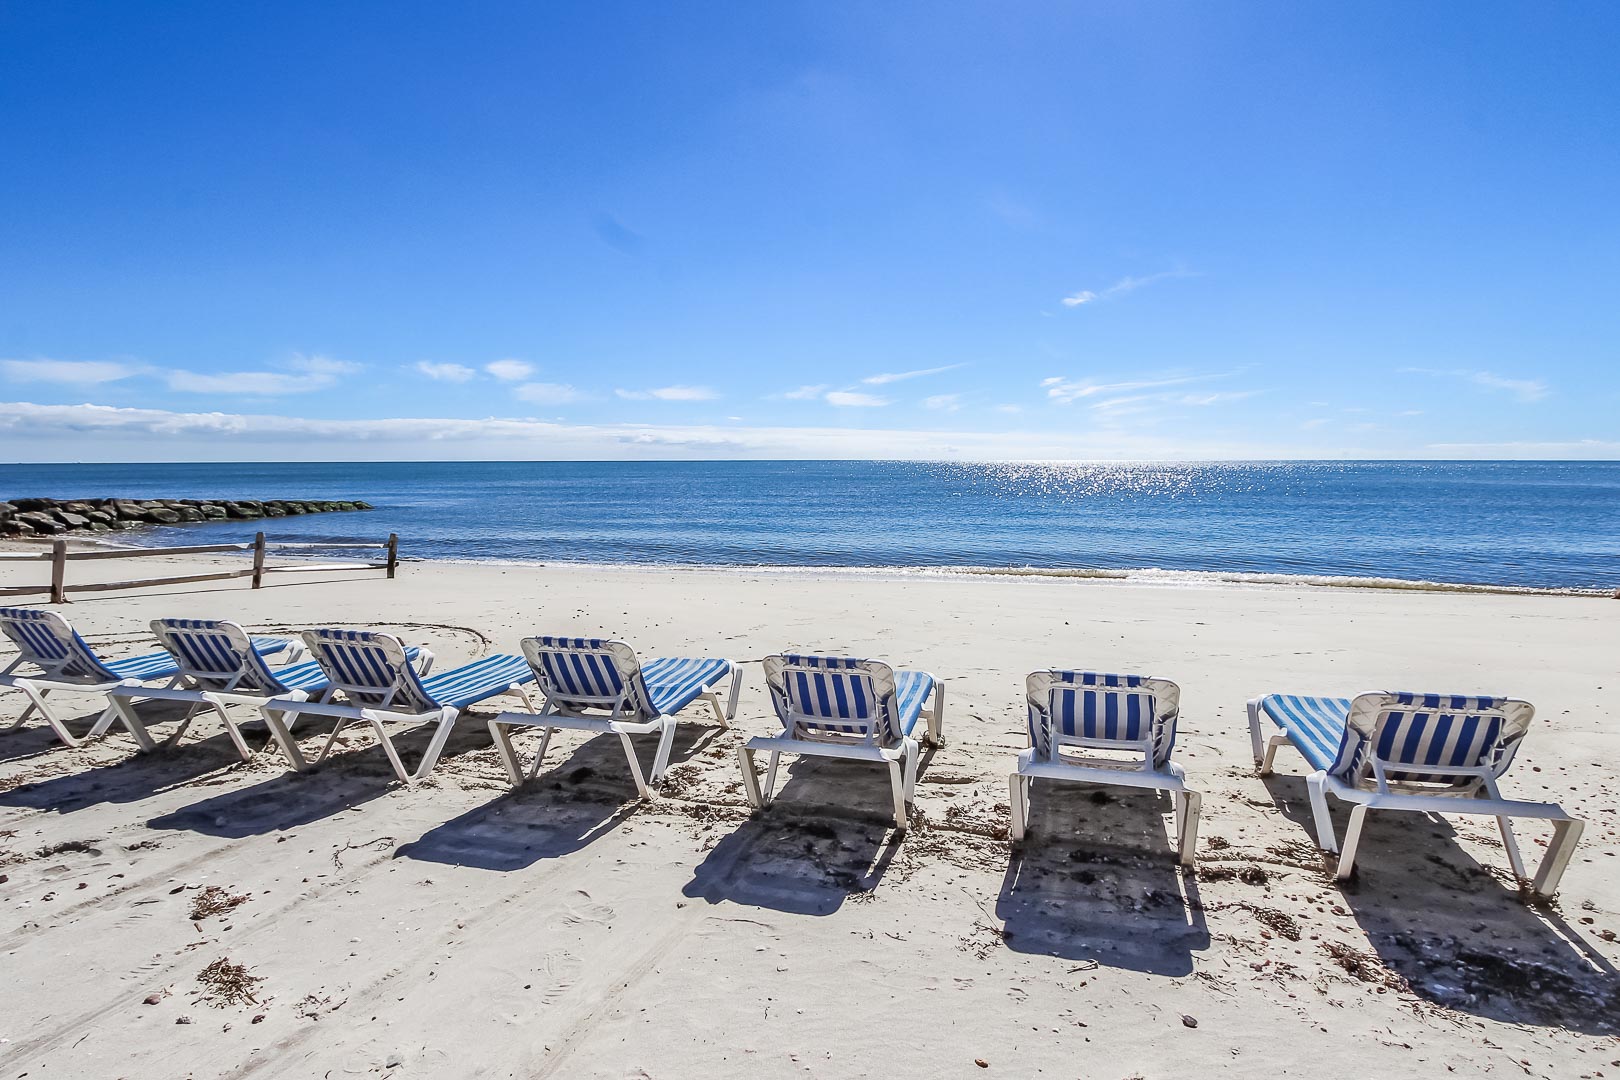 Beach lounging chairs for the family to enjoy at VRI's Seawinds II Resort in Massachusetts.